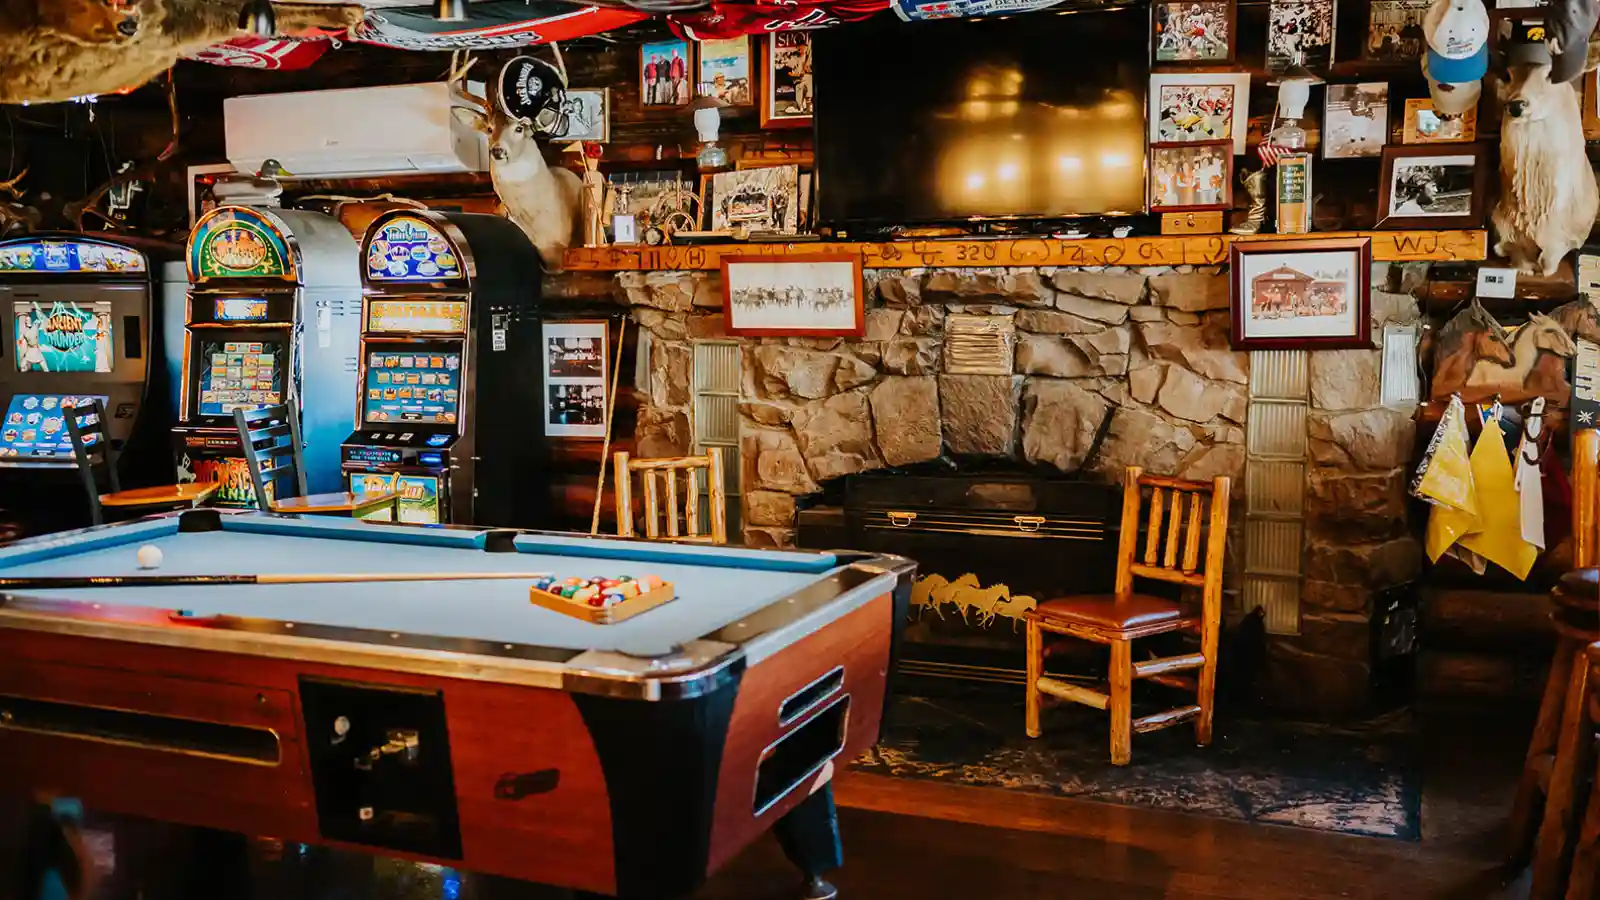 The pool table, fireplace, and gaming machines inside the Corral Bar and Steakhouse in Gallatin Gateway, MT.